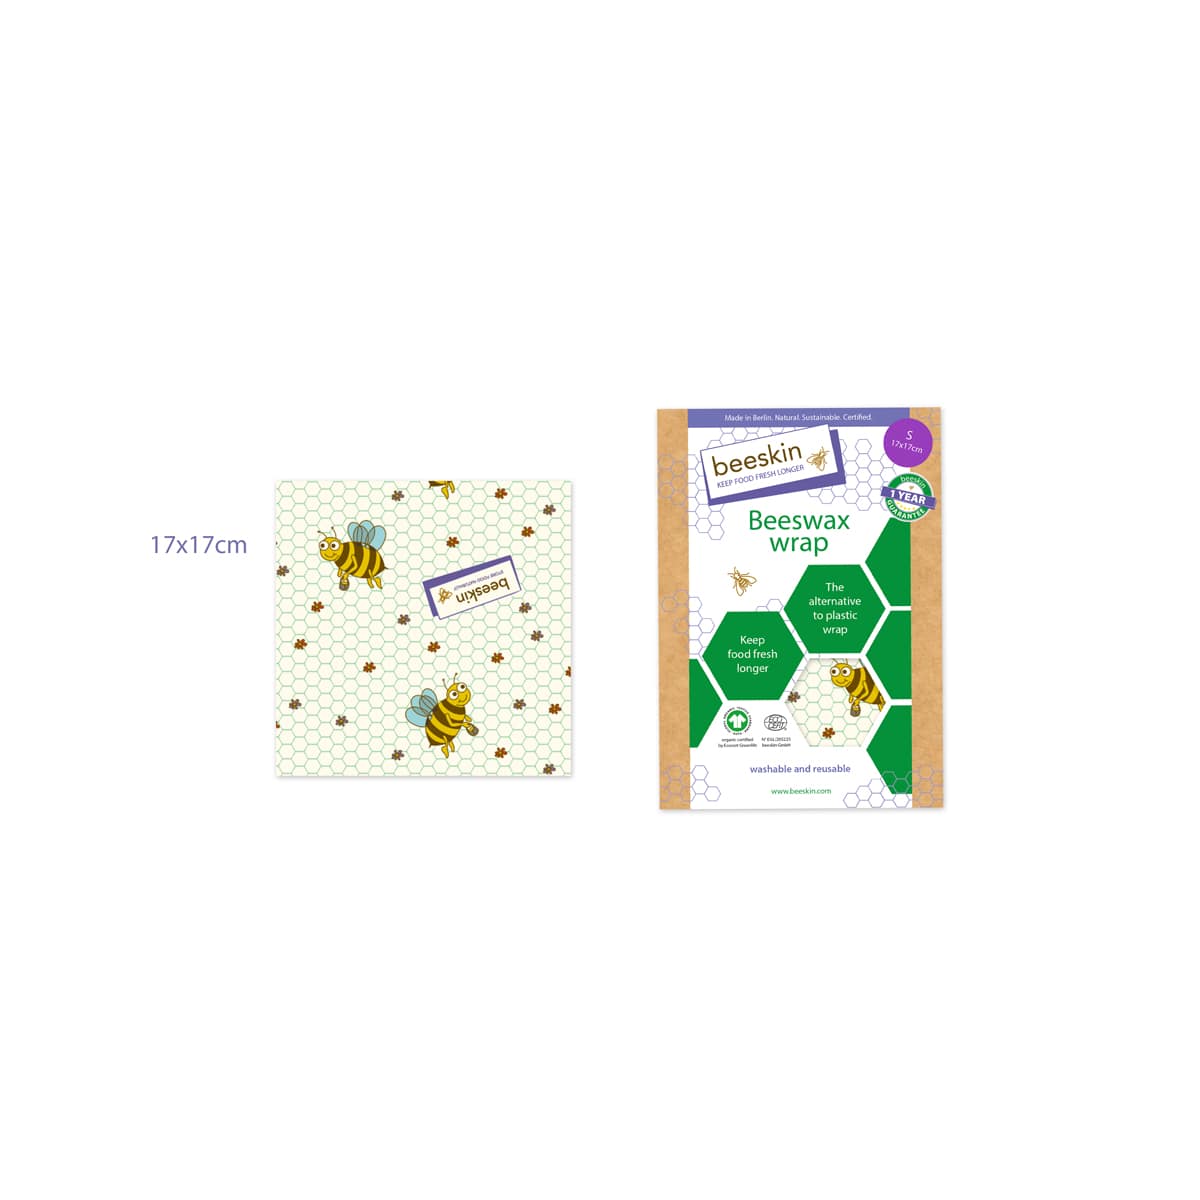 beeskin beeswax wrap s kids little bee next to packaging